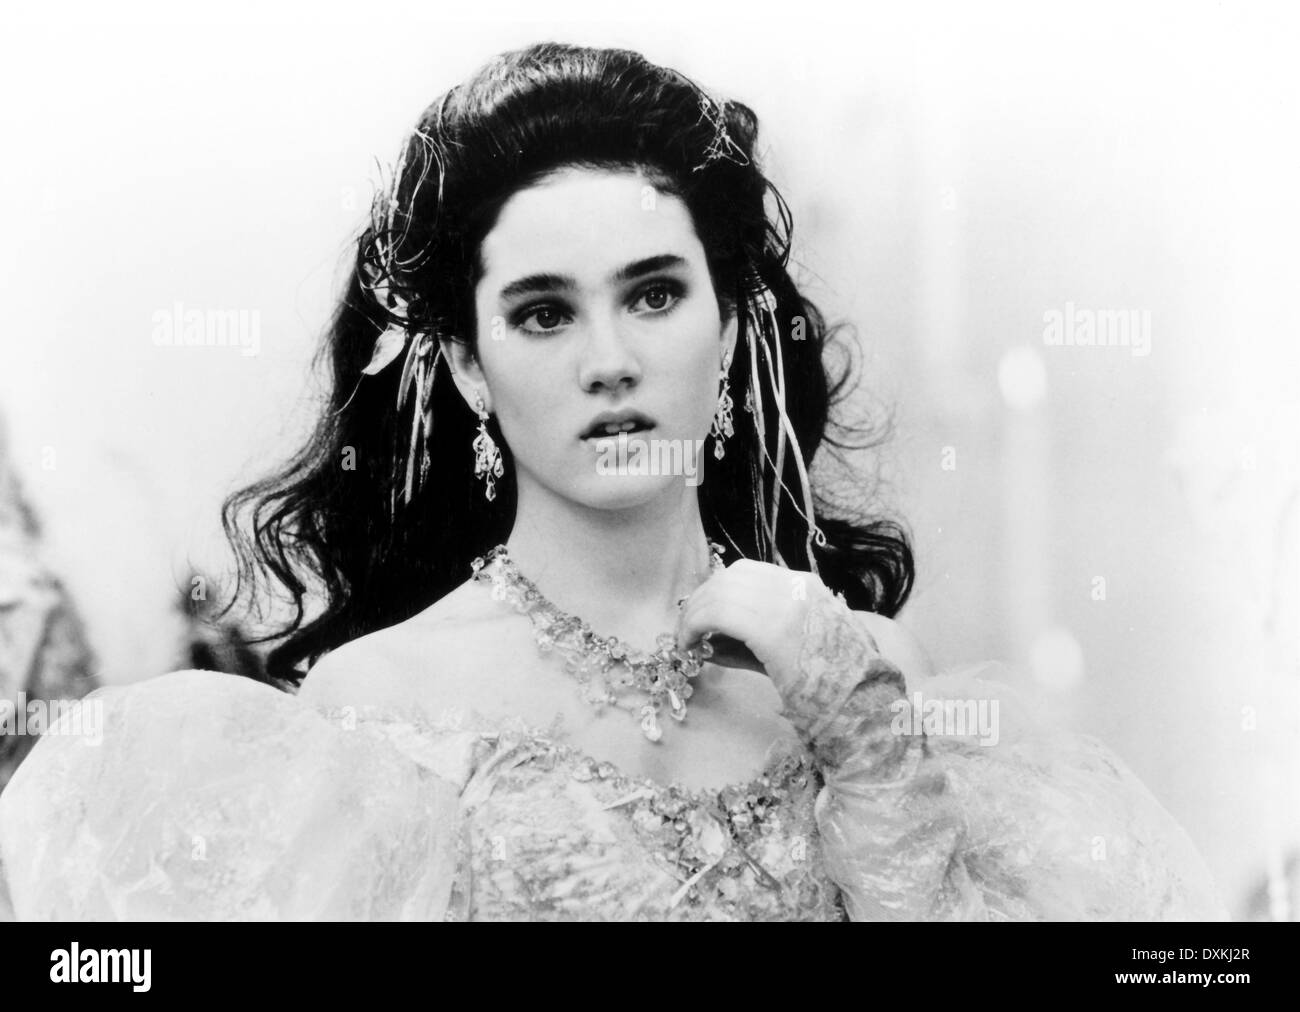 Jennifer Connelly as Sarah Williams in Labyrinth - 1986